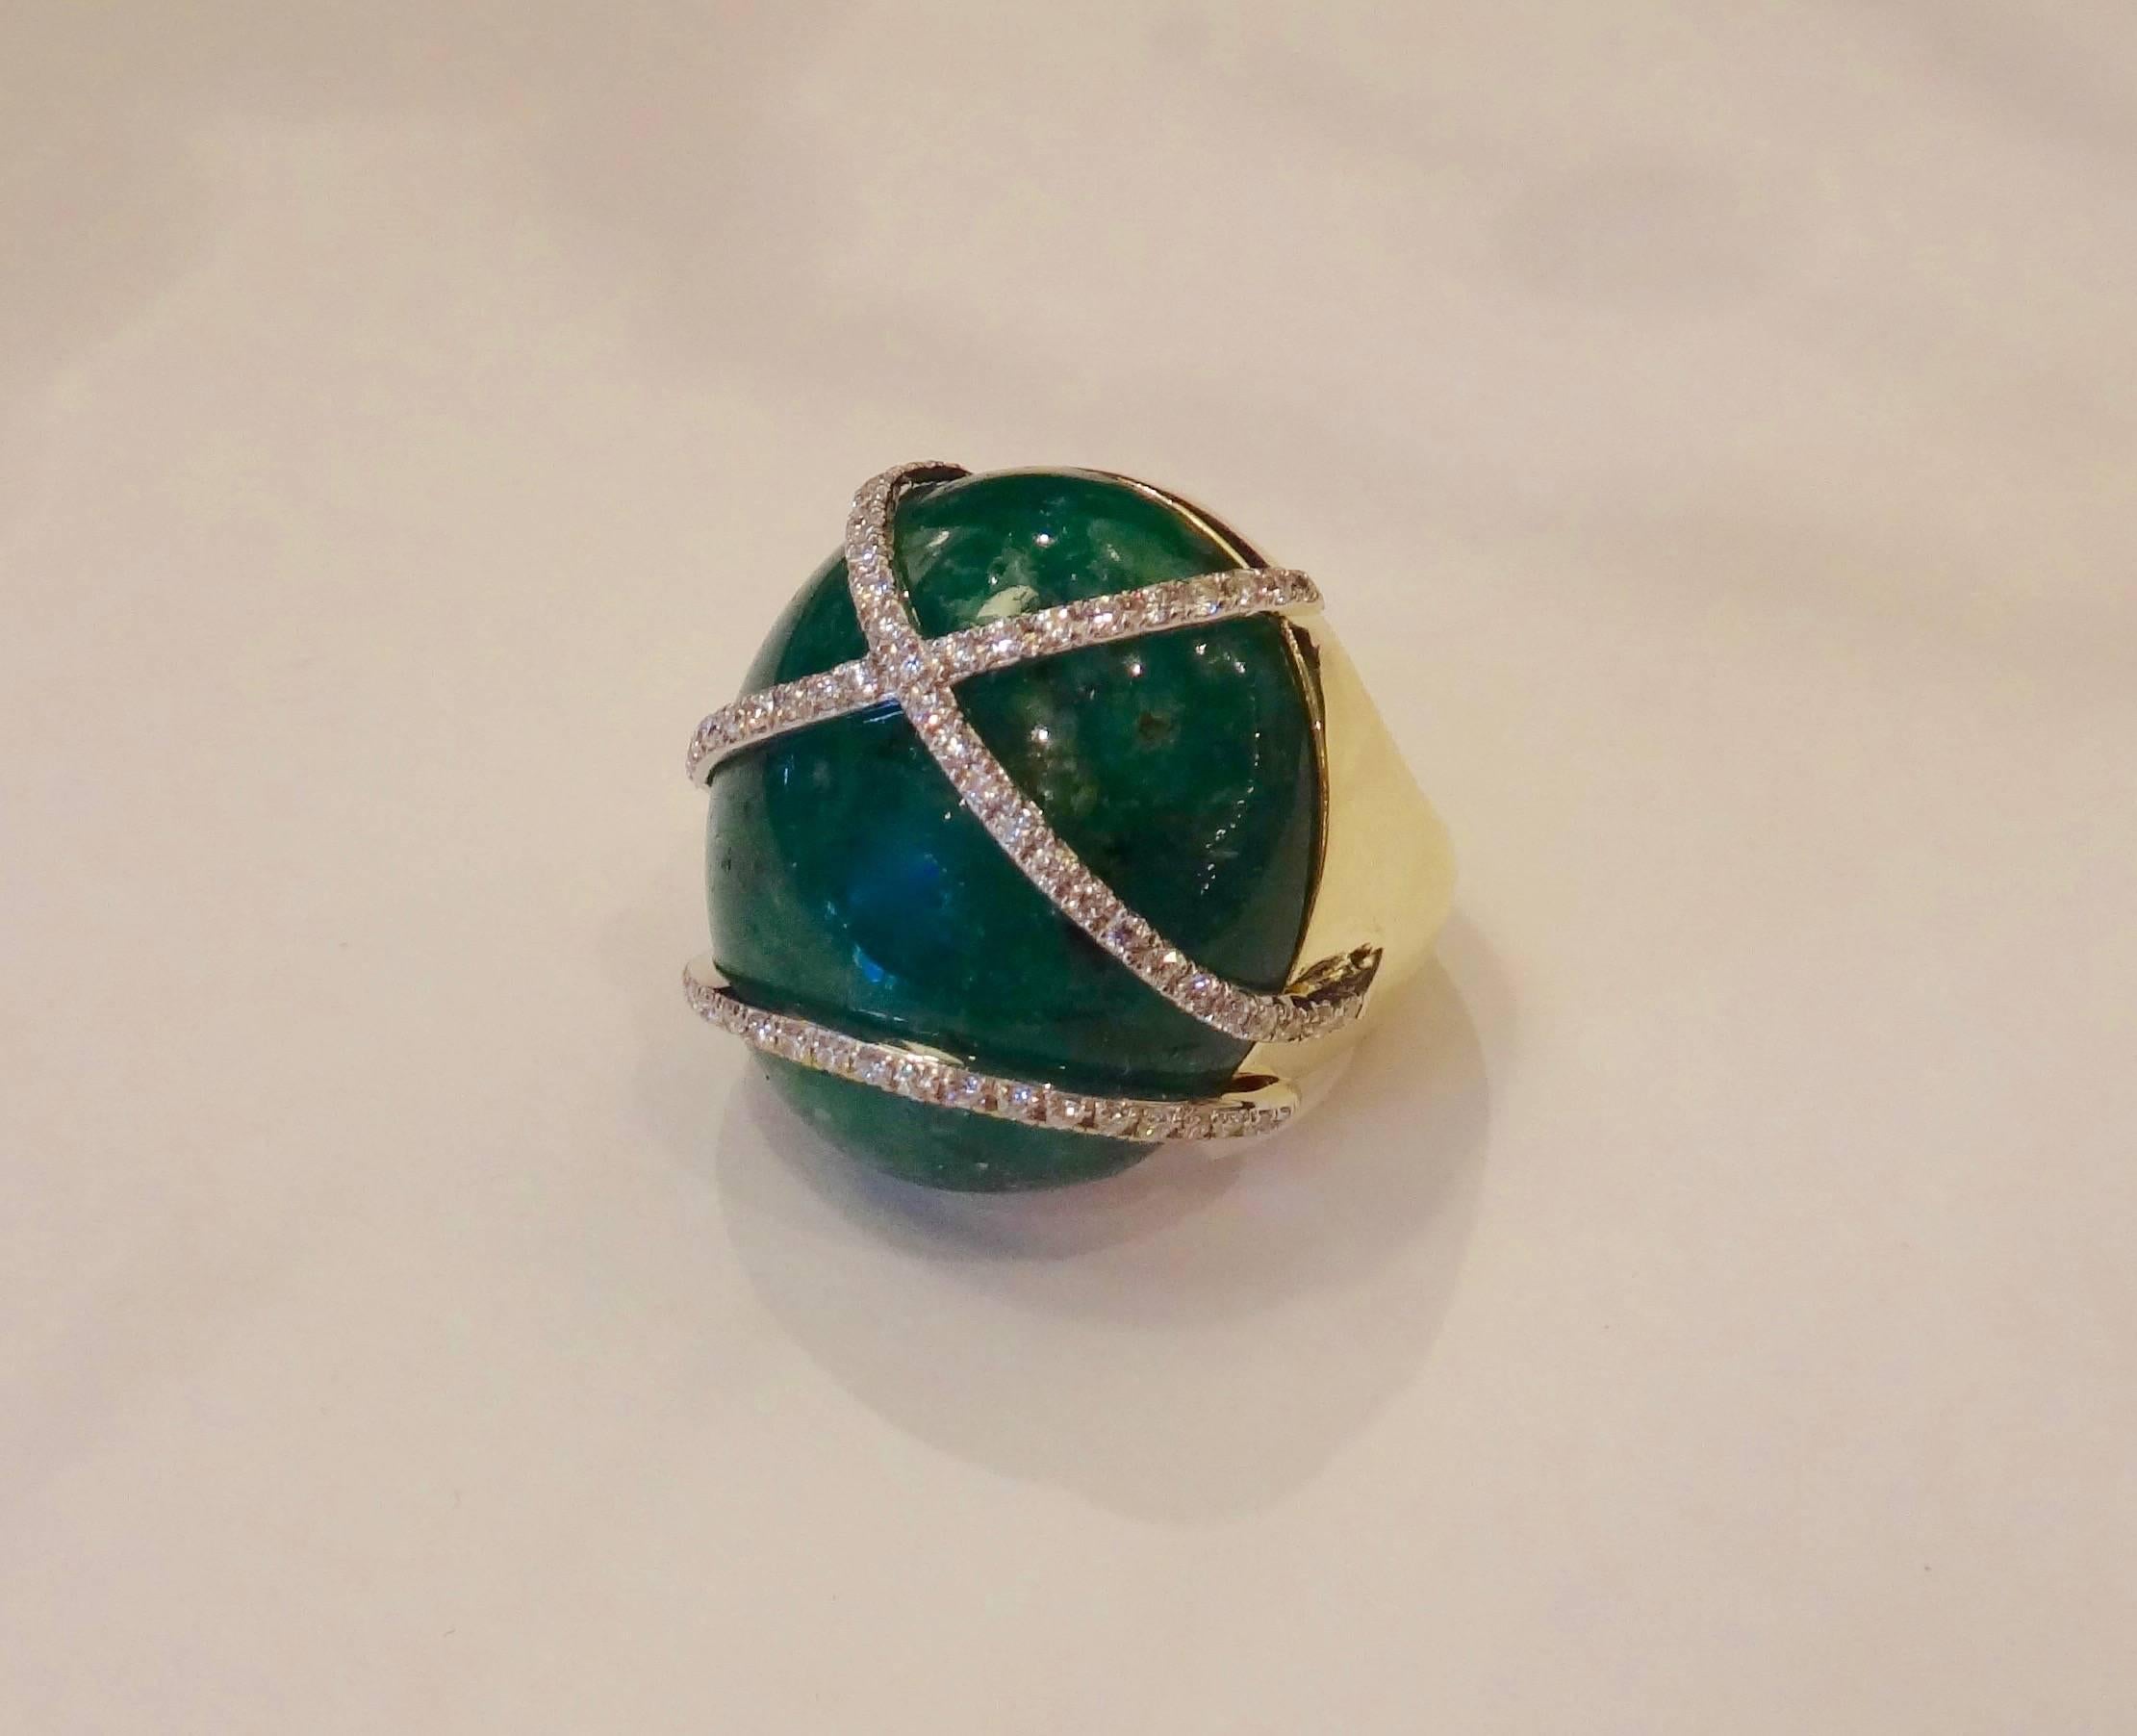 Large cabochon emerald of 46.60 carats is held in place by pave diamond straps (.68 carats total weight) in this dynamic 18k yellow gold dome ring.  Ring size 8 and to some extent is sizable.